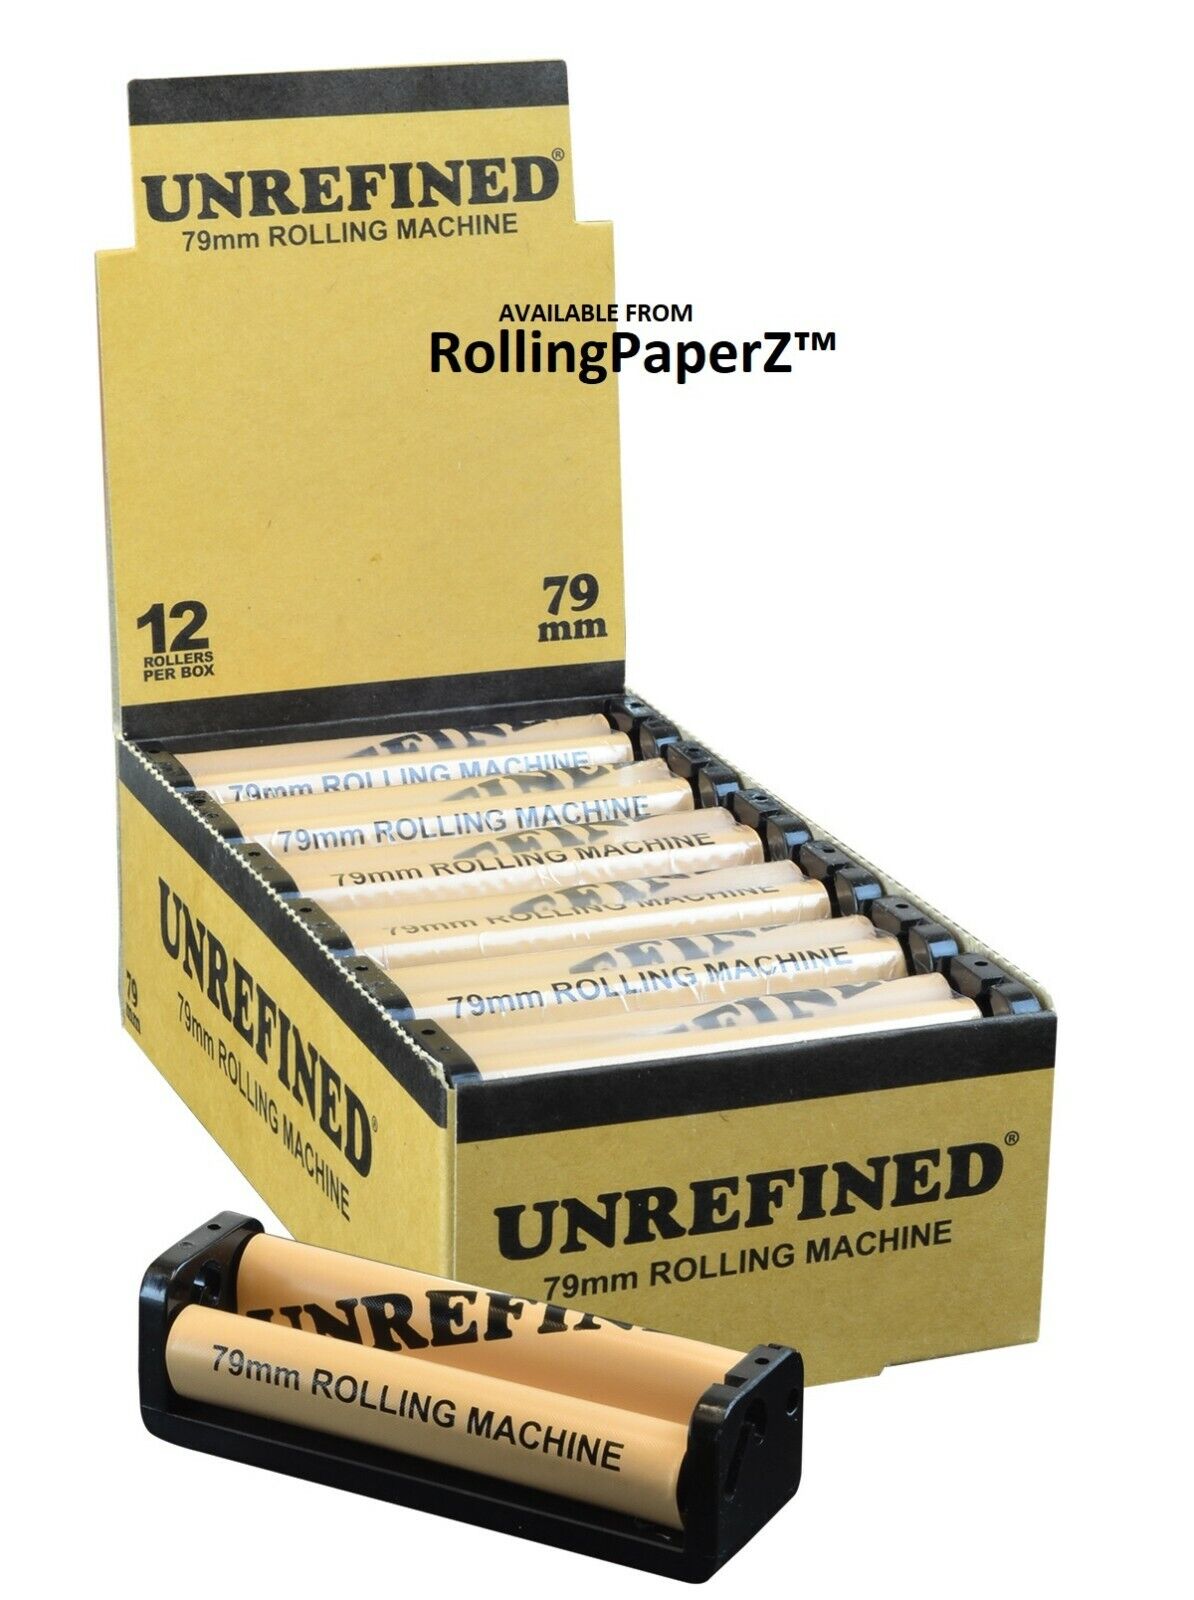 Buy FOUR UNREFINED 79mm Cigarette Rolling Machines w/ instructions